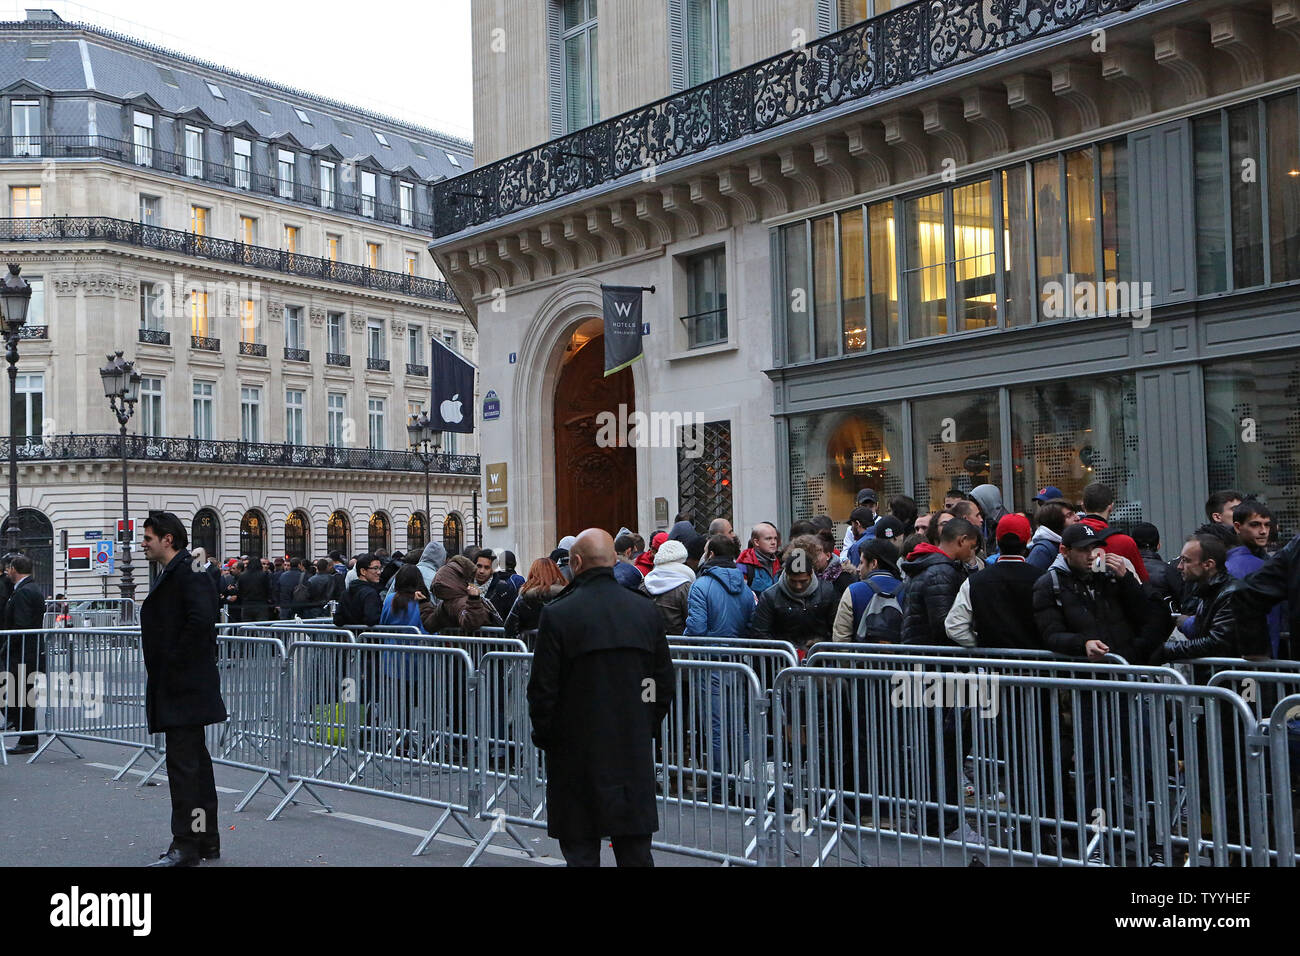 Customers line up in front of the Apple Store near Place de l'Opera before the launch of the new iPhone5s and iPhone5c today in Paris on September 20, 2013.  The iPhone 5s features a new Touch ID fingerprint sensor on the home button that allows users to unlock their phone without using a password while the iPhone 5c offers users a choice of various colors.   UPI/David Silpa Stock Photo